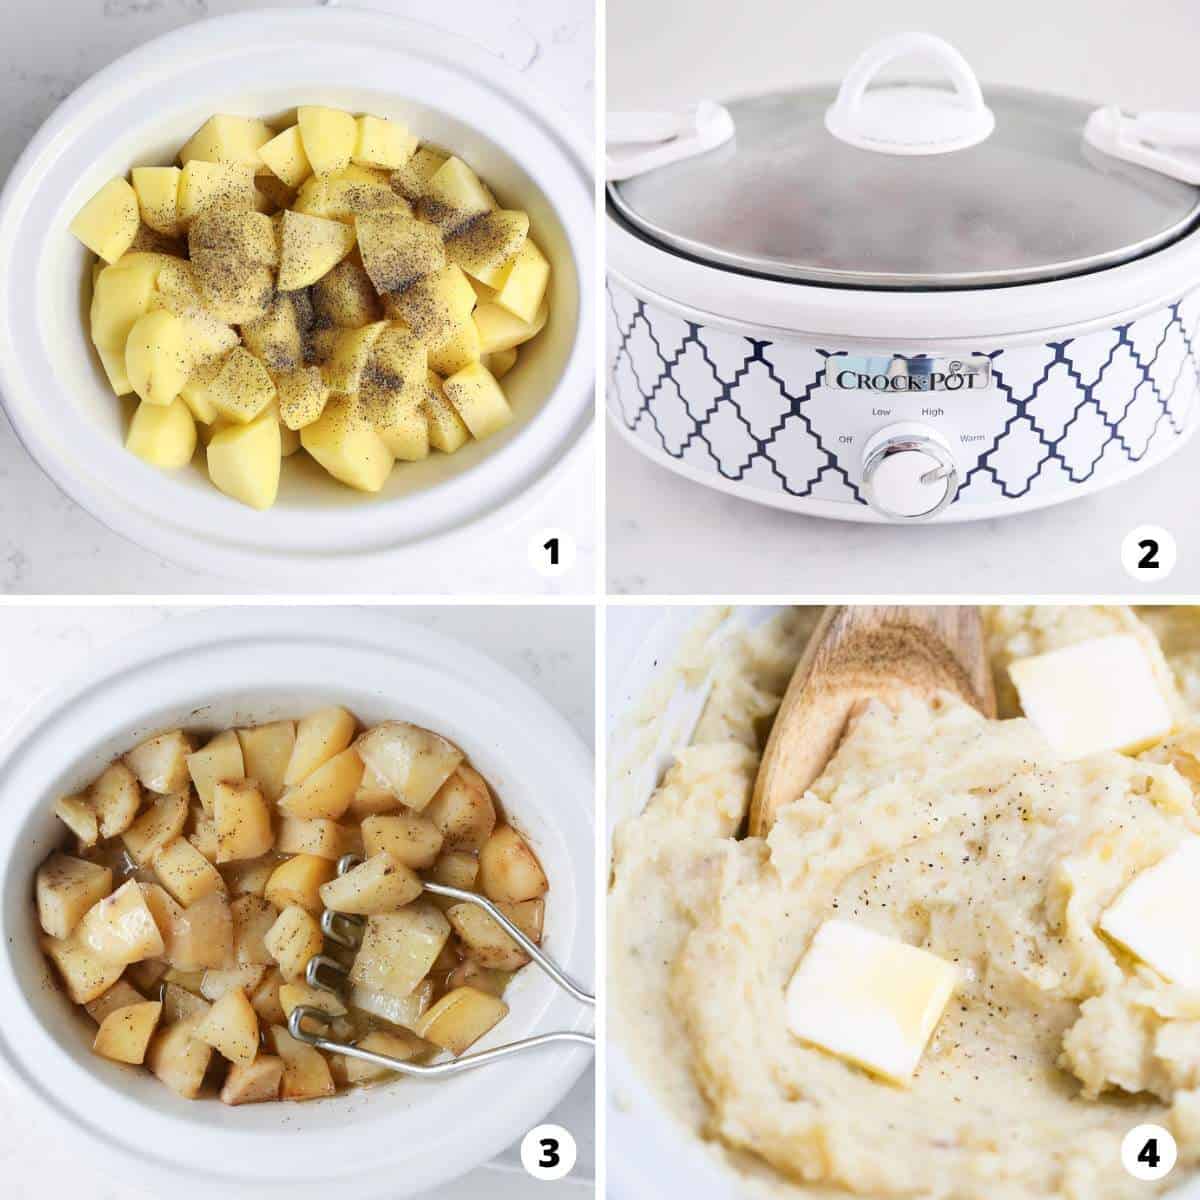 Showing how to make crockpot mashed potatoes in a 4 step collage.